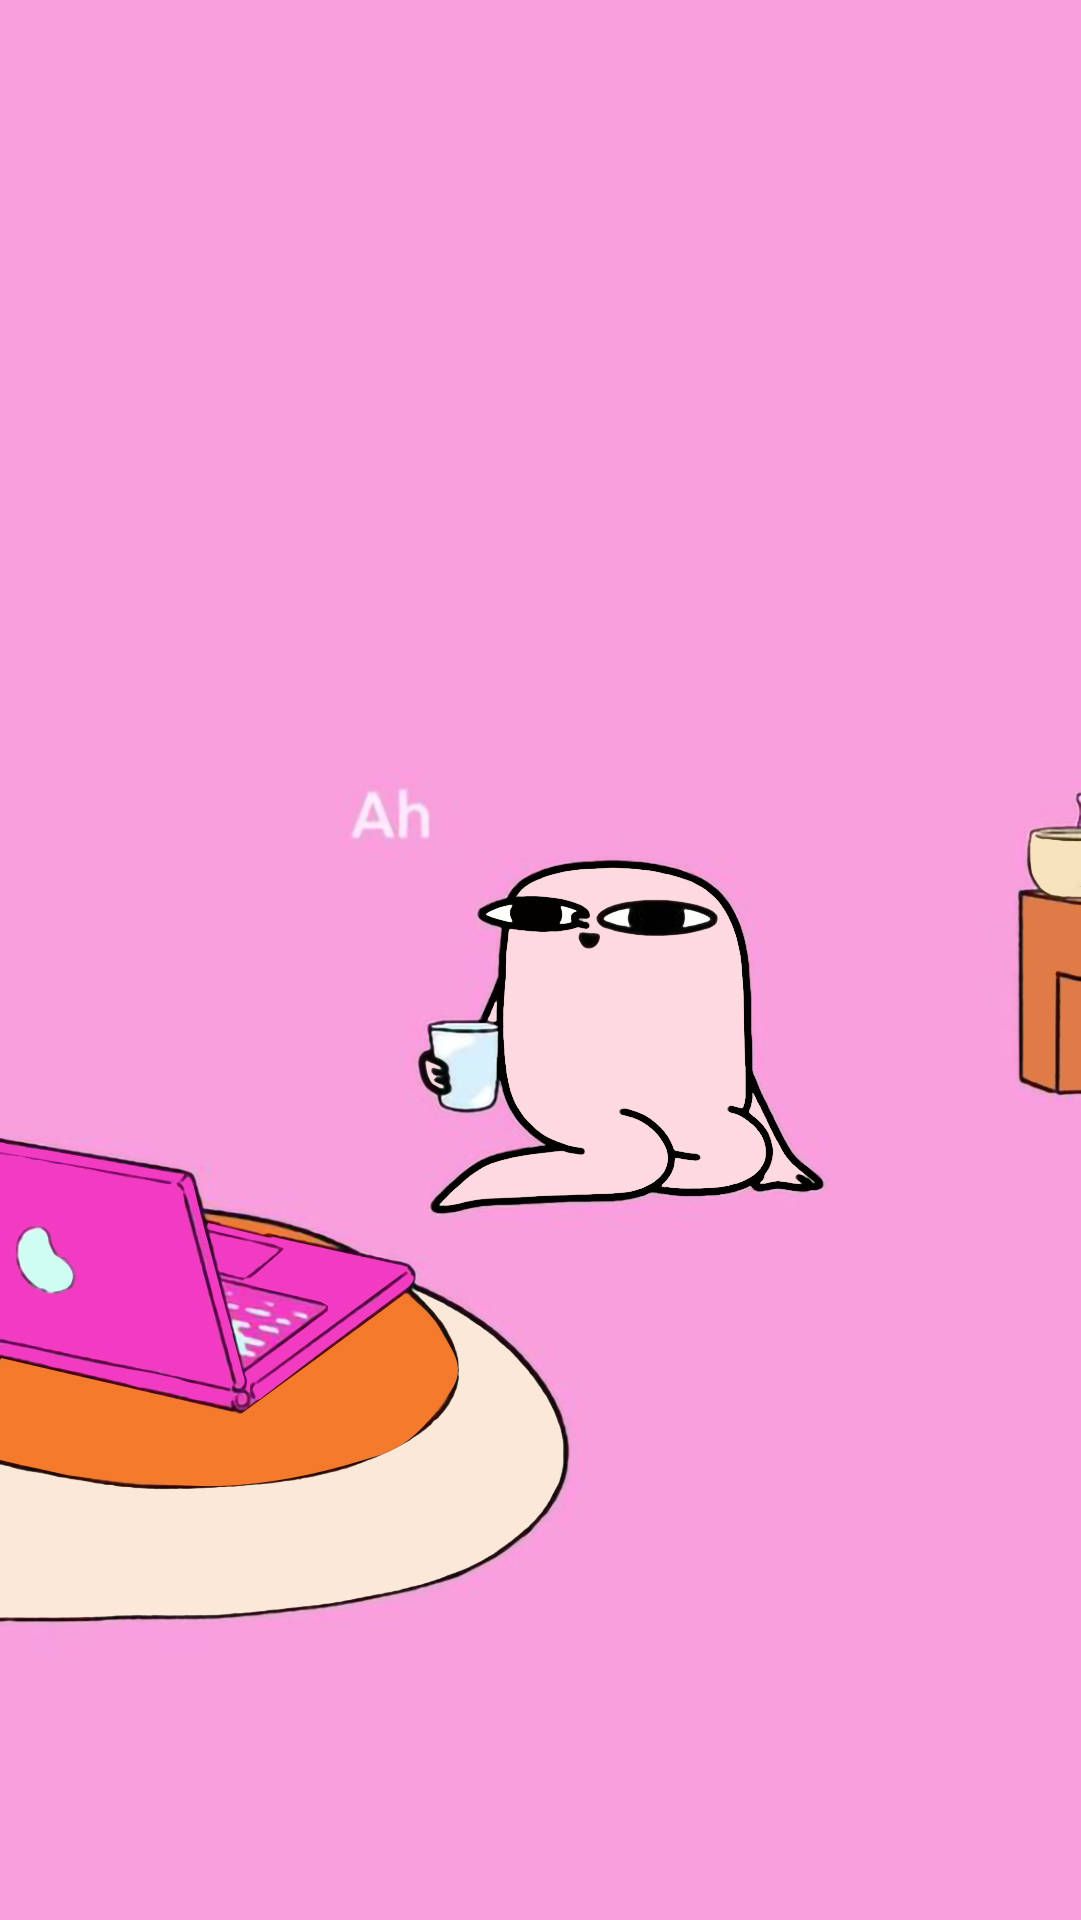 Wallpaper for phone of a pink blob character drinking coffee and looking at a laptop - Funny